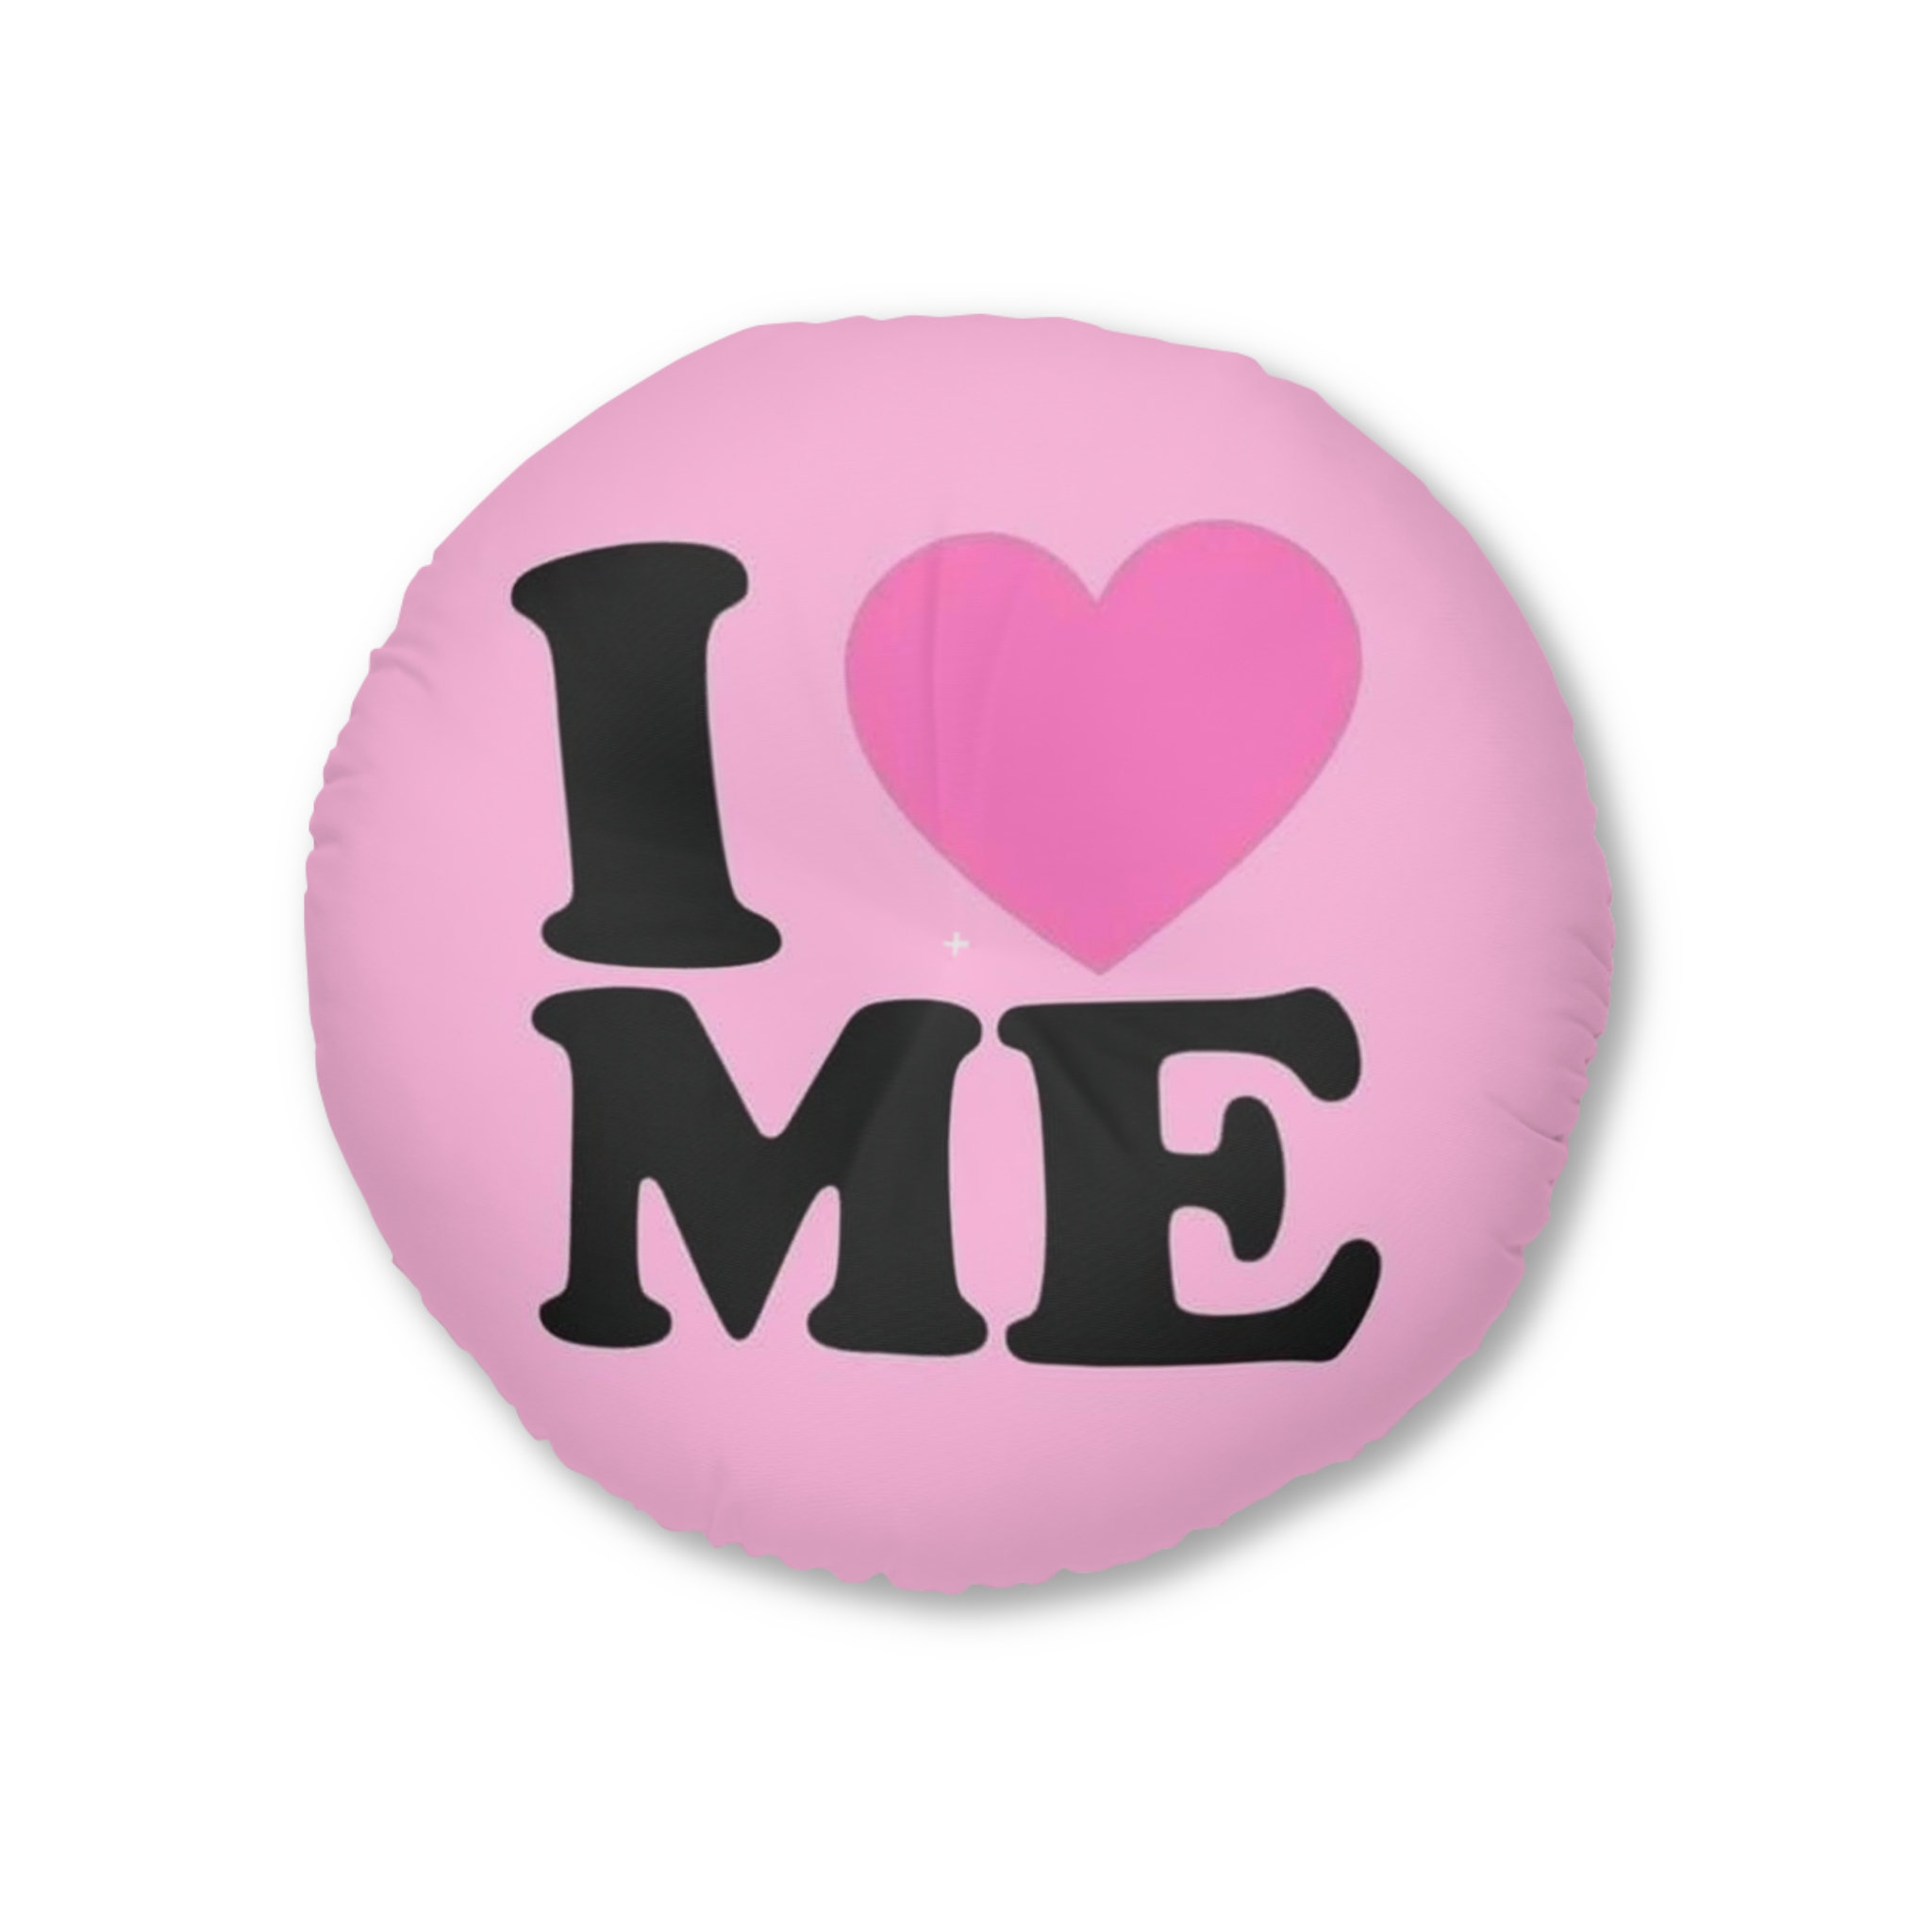 Y2K Inspired Round Pink and Black "I Heart Me" Throw Pillow